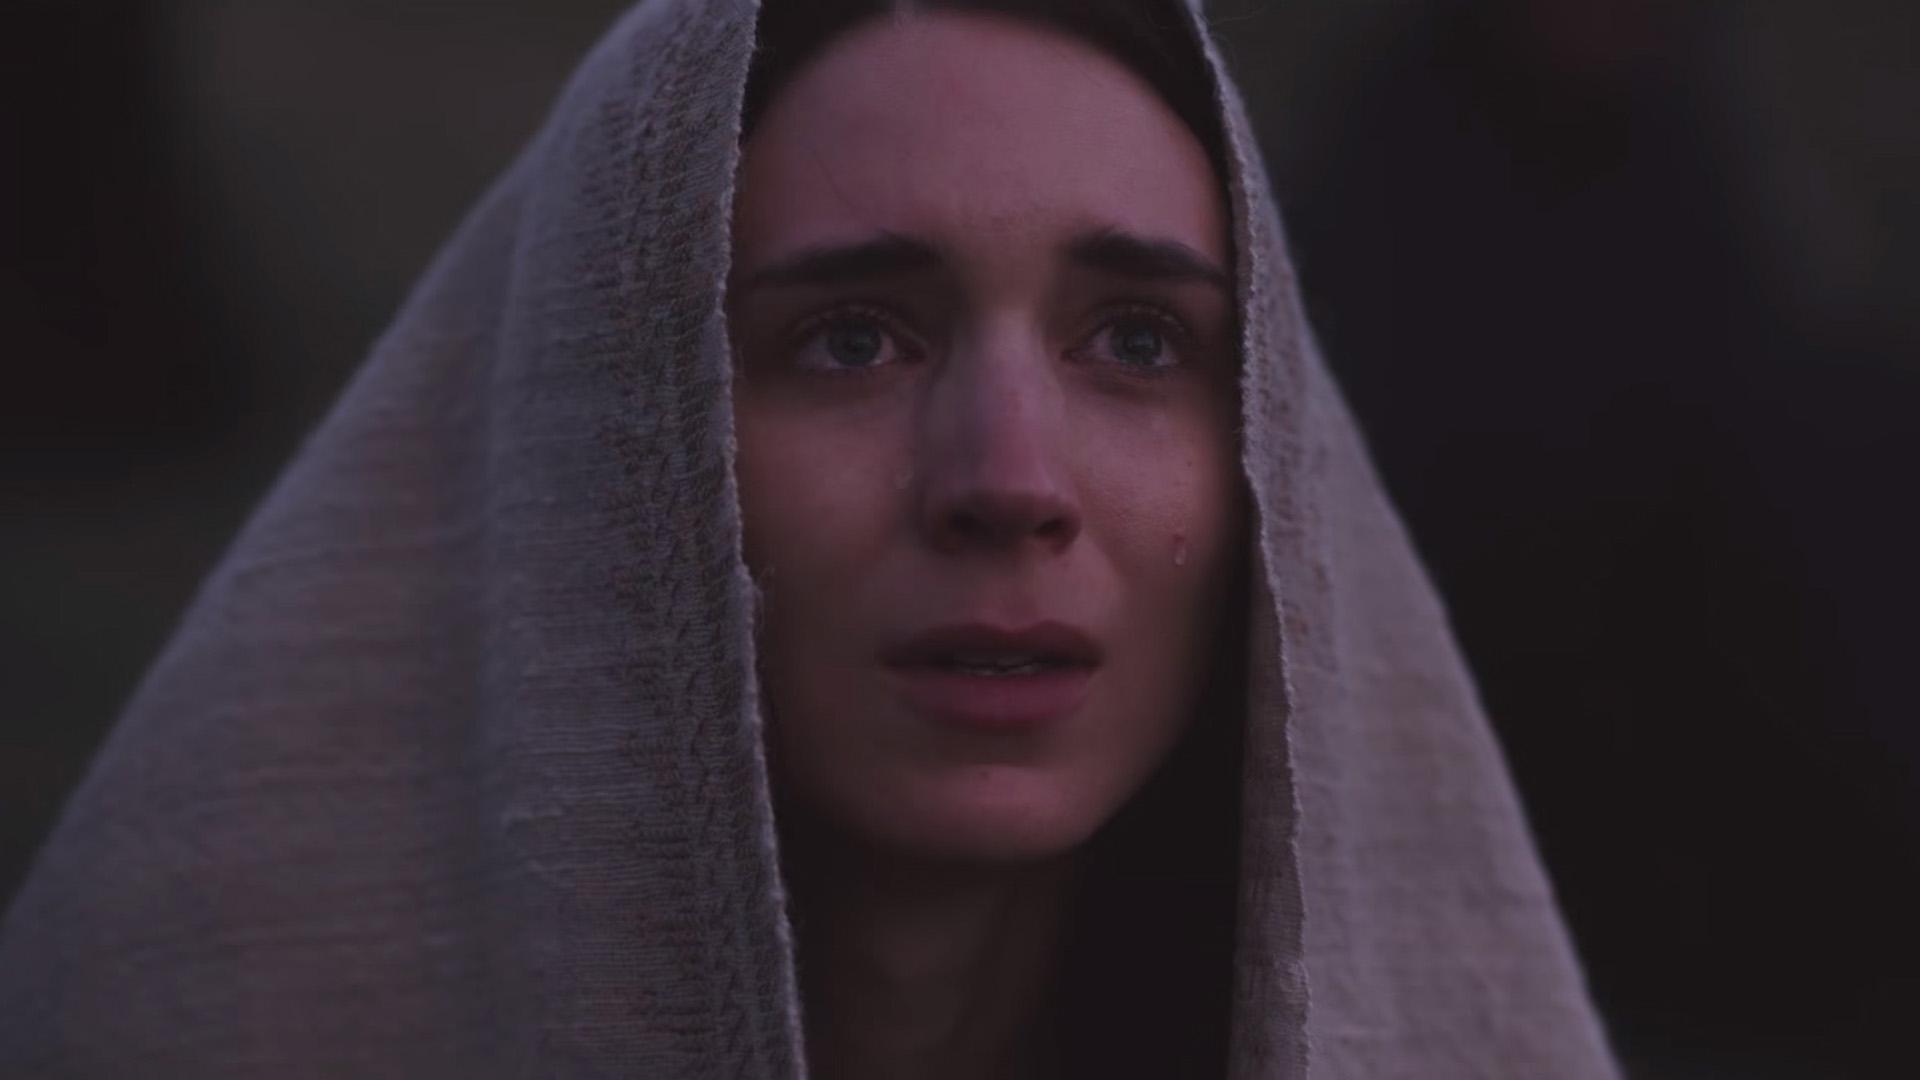 Discover The Gospel According To “Mary Magdalene”